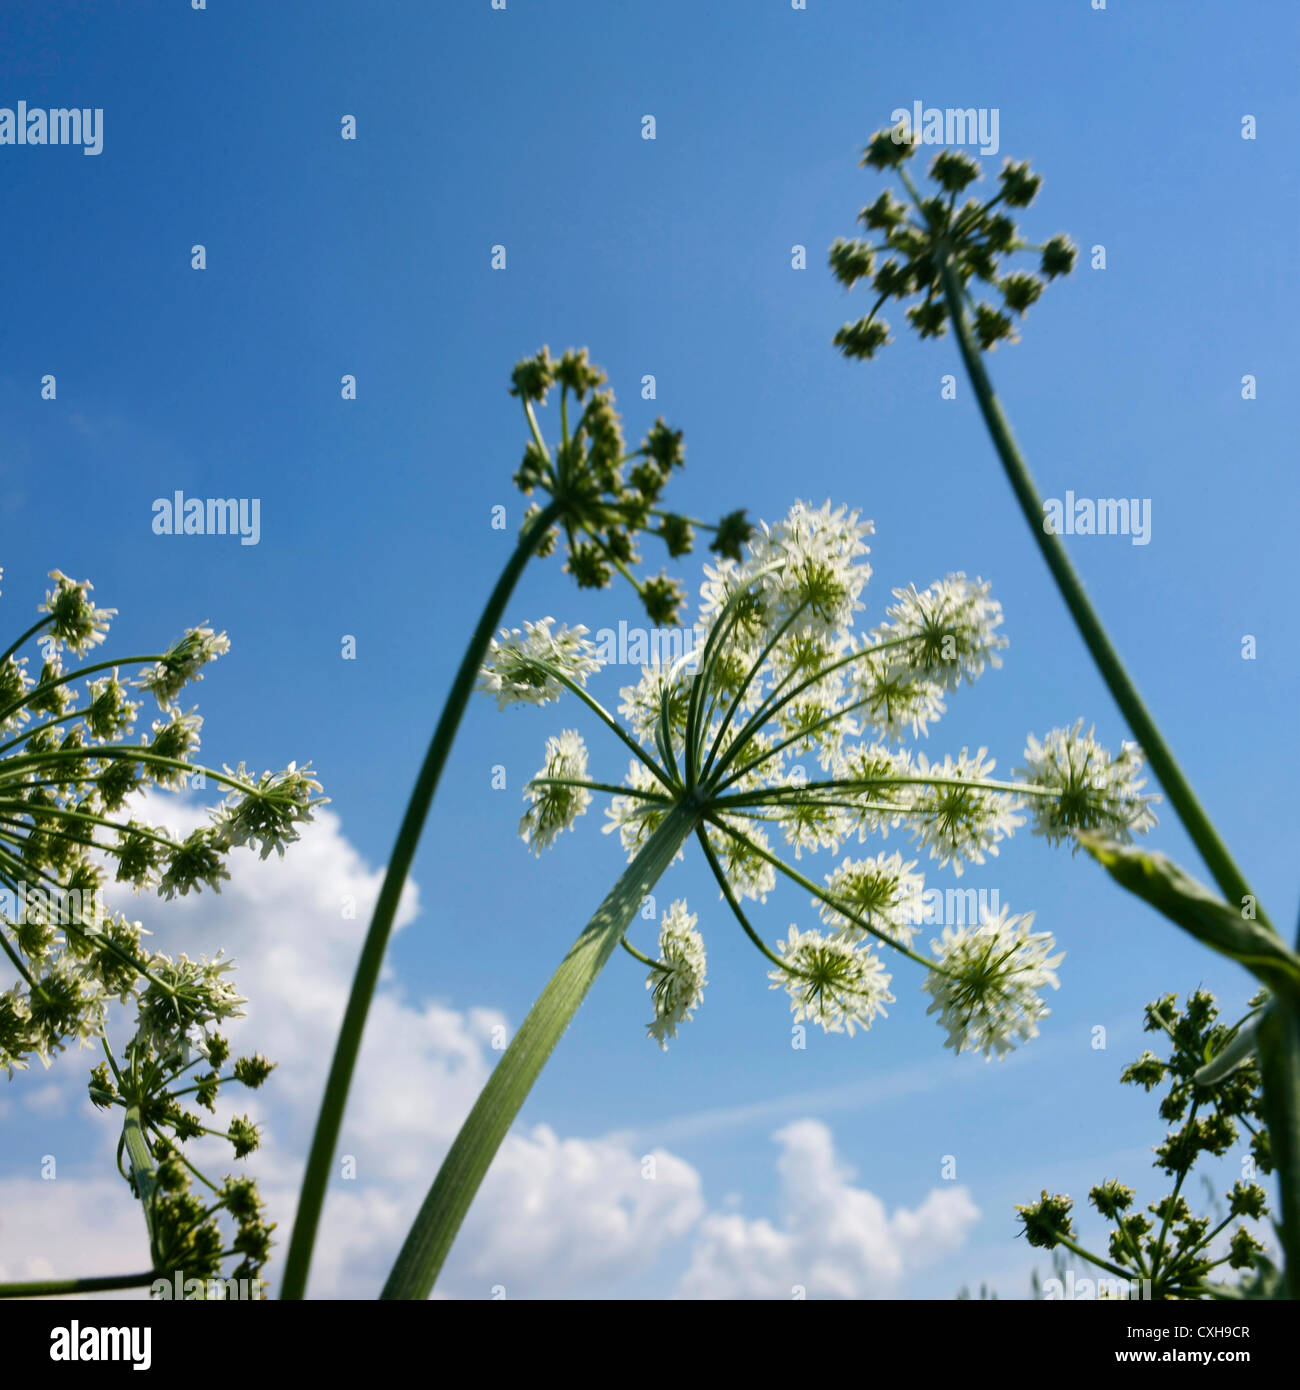 Umbels, abstract silhouettes. Angelica umbel (Angelica archangelica). France. Stock Photo